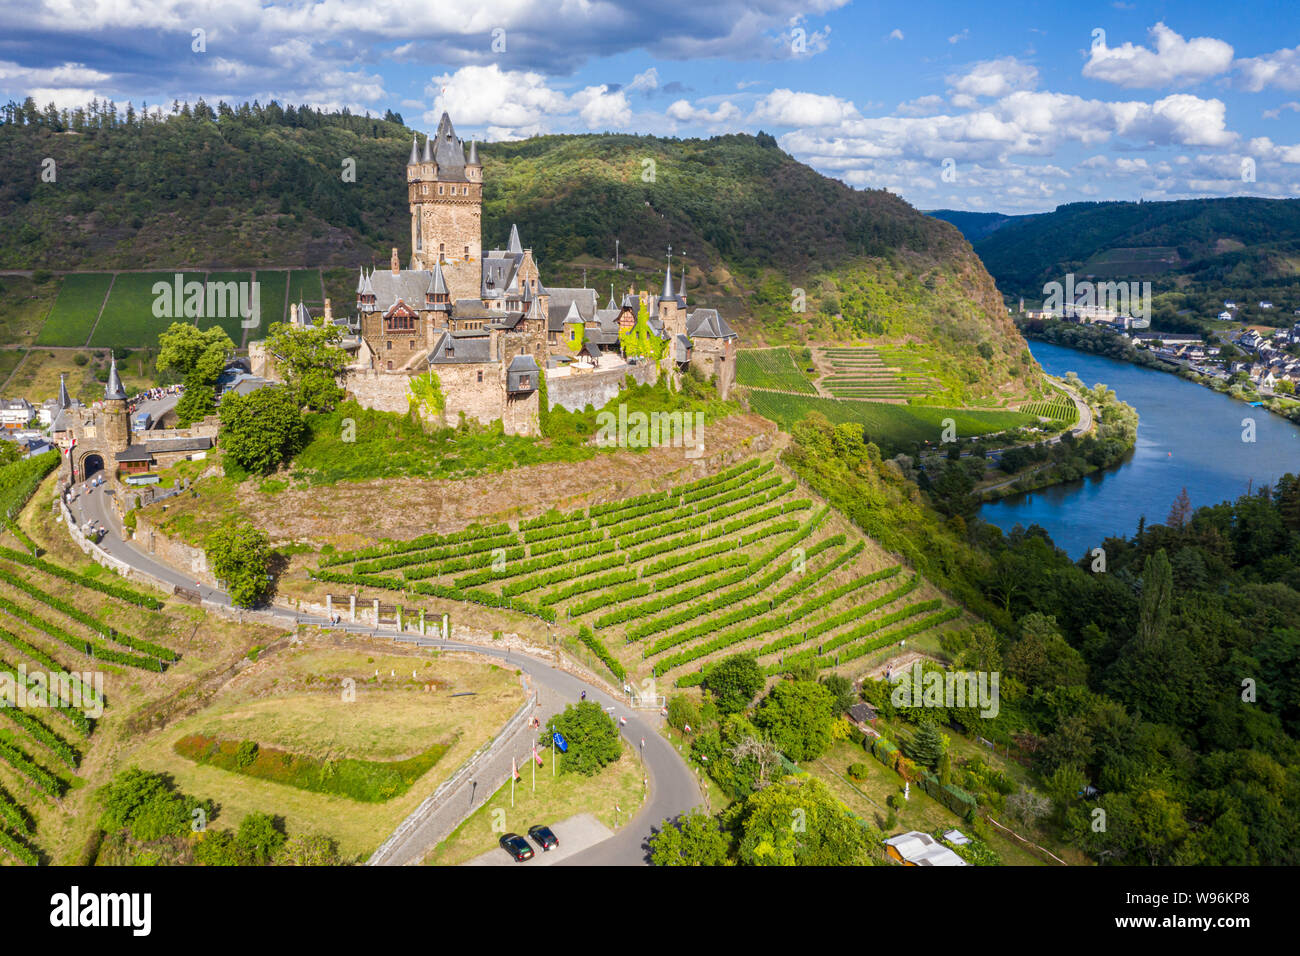 Cochem Imperial Castle, Reichsburg Cochem, reconstructed in the Gothic Revival style protects historic Cochem town on left bank of Moselle river and C Stock Photo